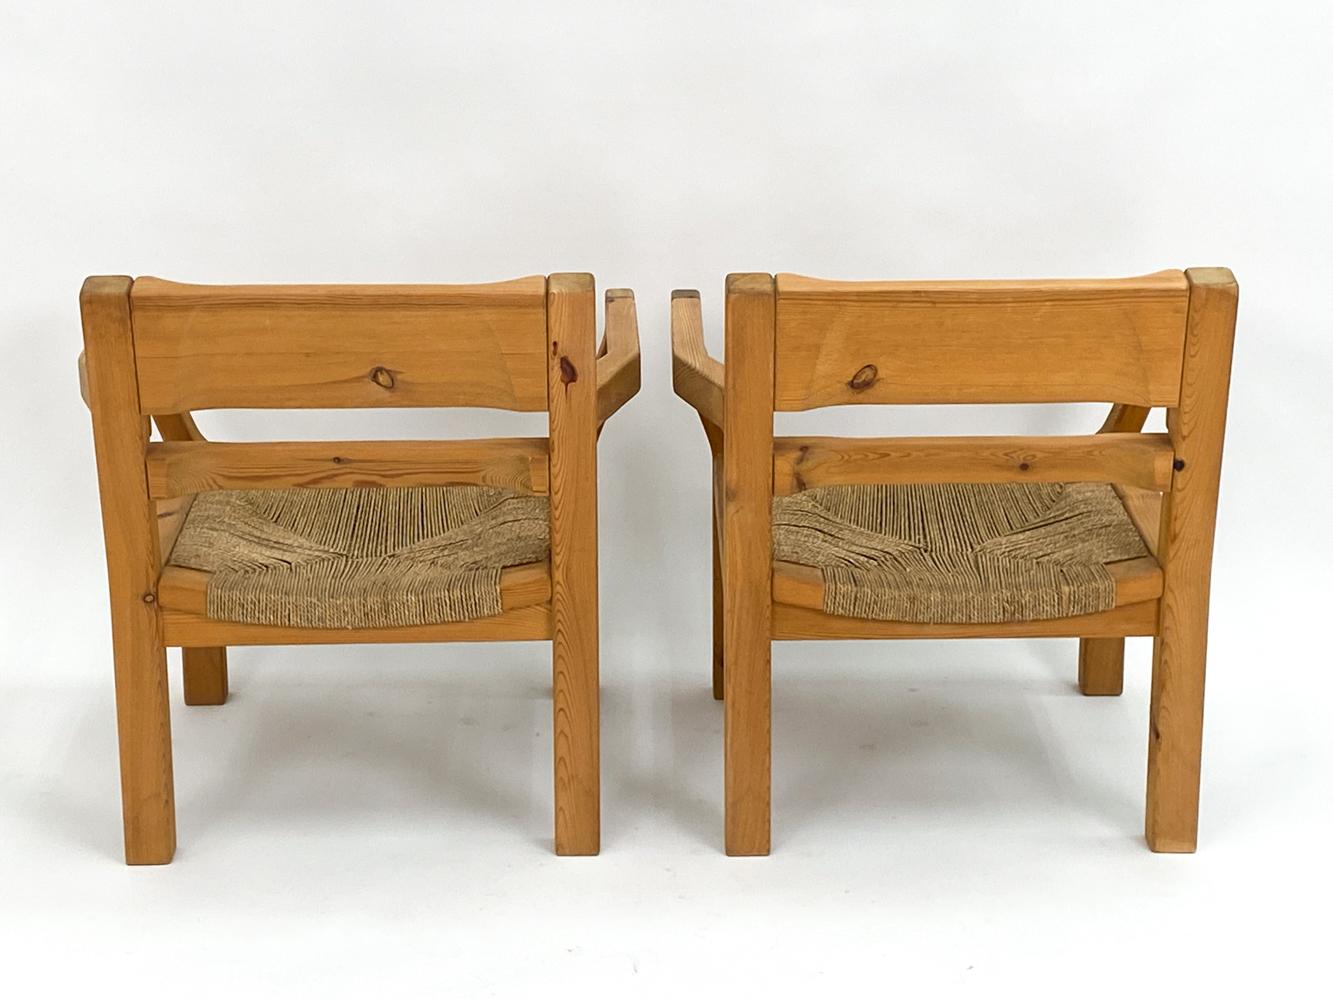 Pair of Tage Poulsen Pine & Rush Seat Lounge Chairs, c. 1970's For Sale 2